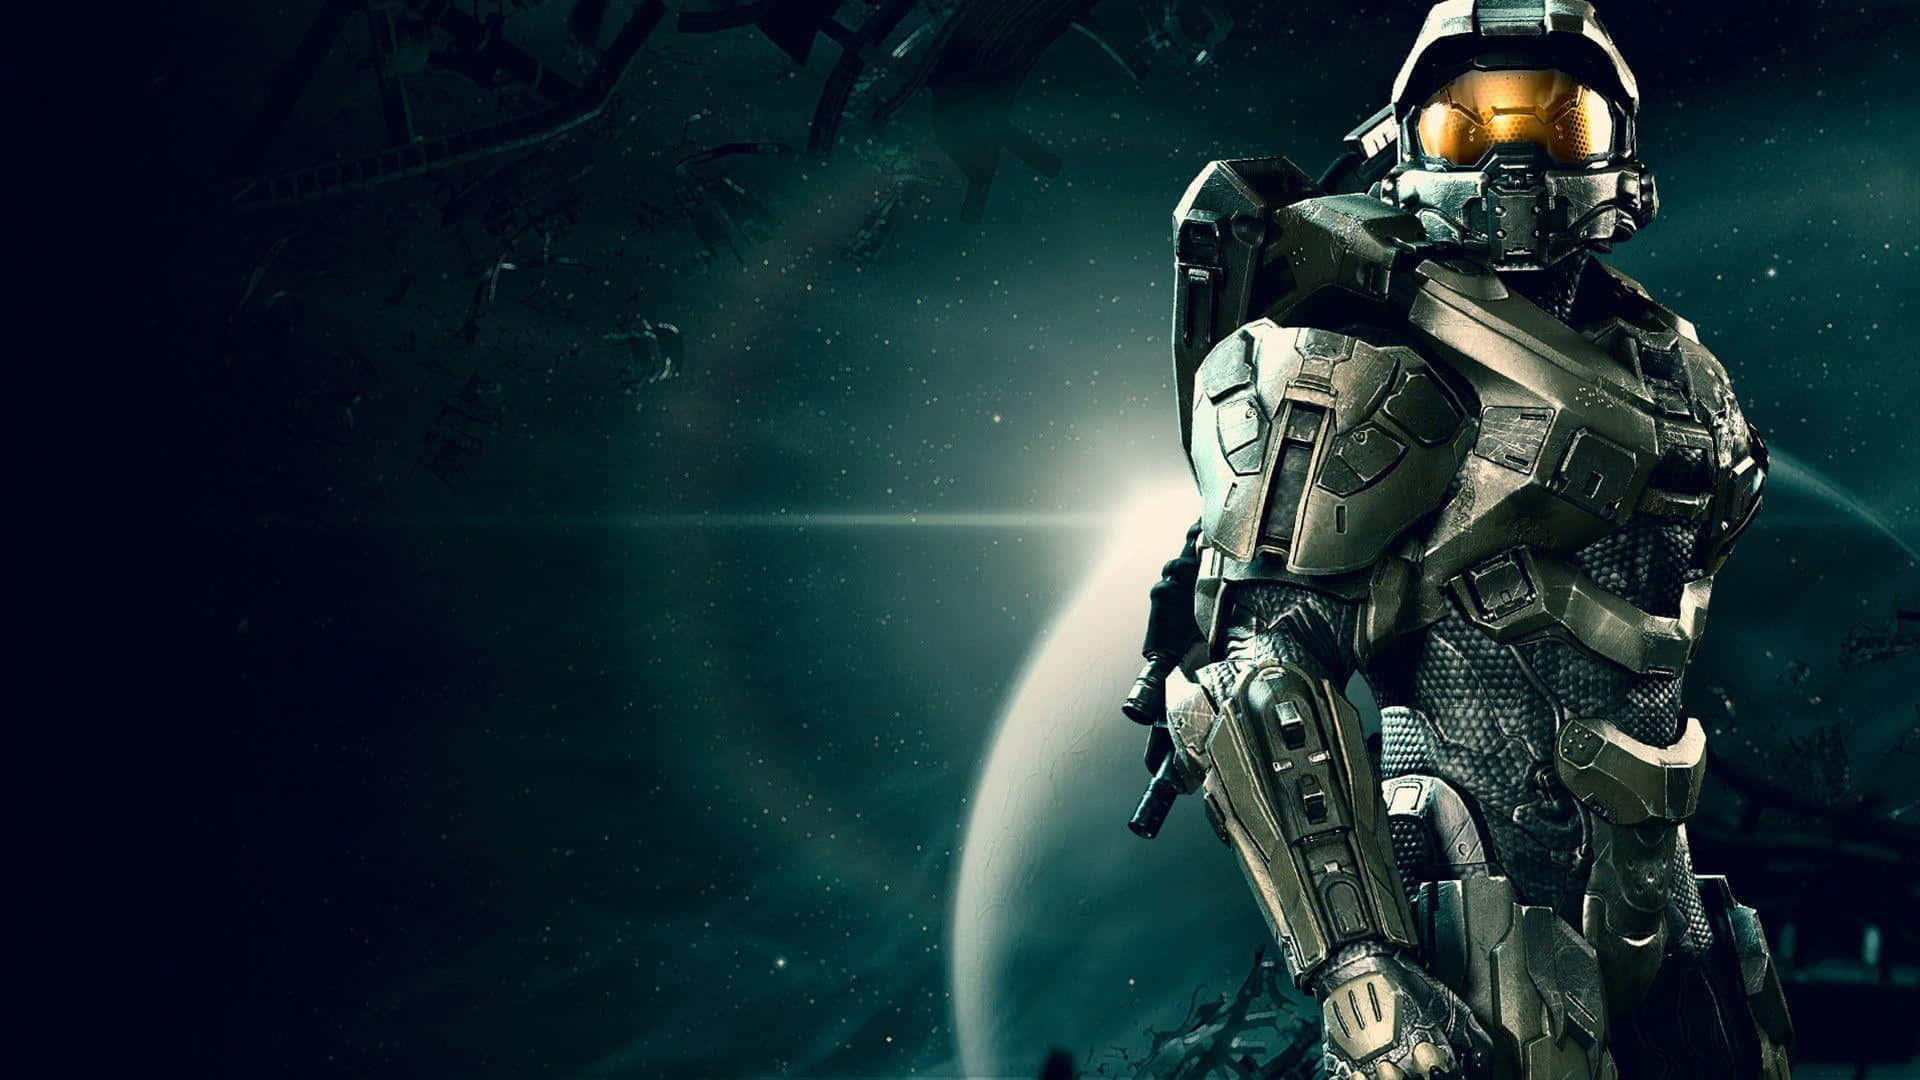 100+] Halo Master Chief Wallpapers